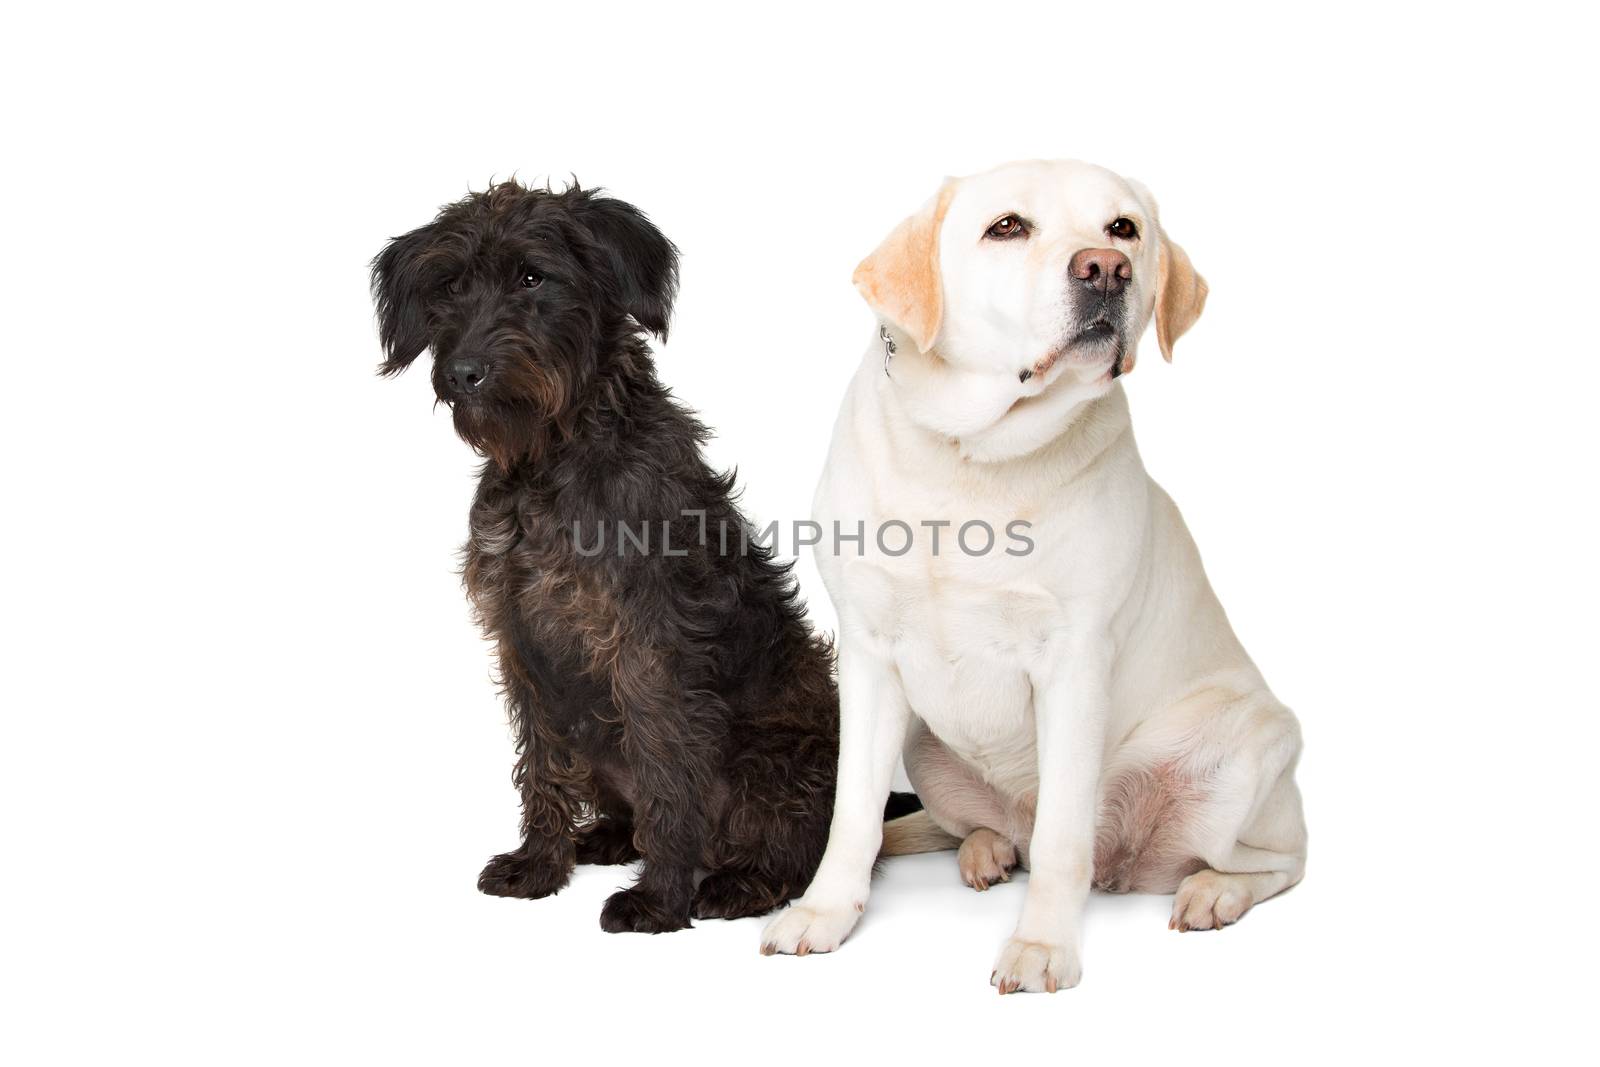 Labrador and a black fluffy dog sitting in front of a white background